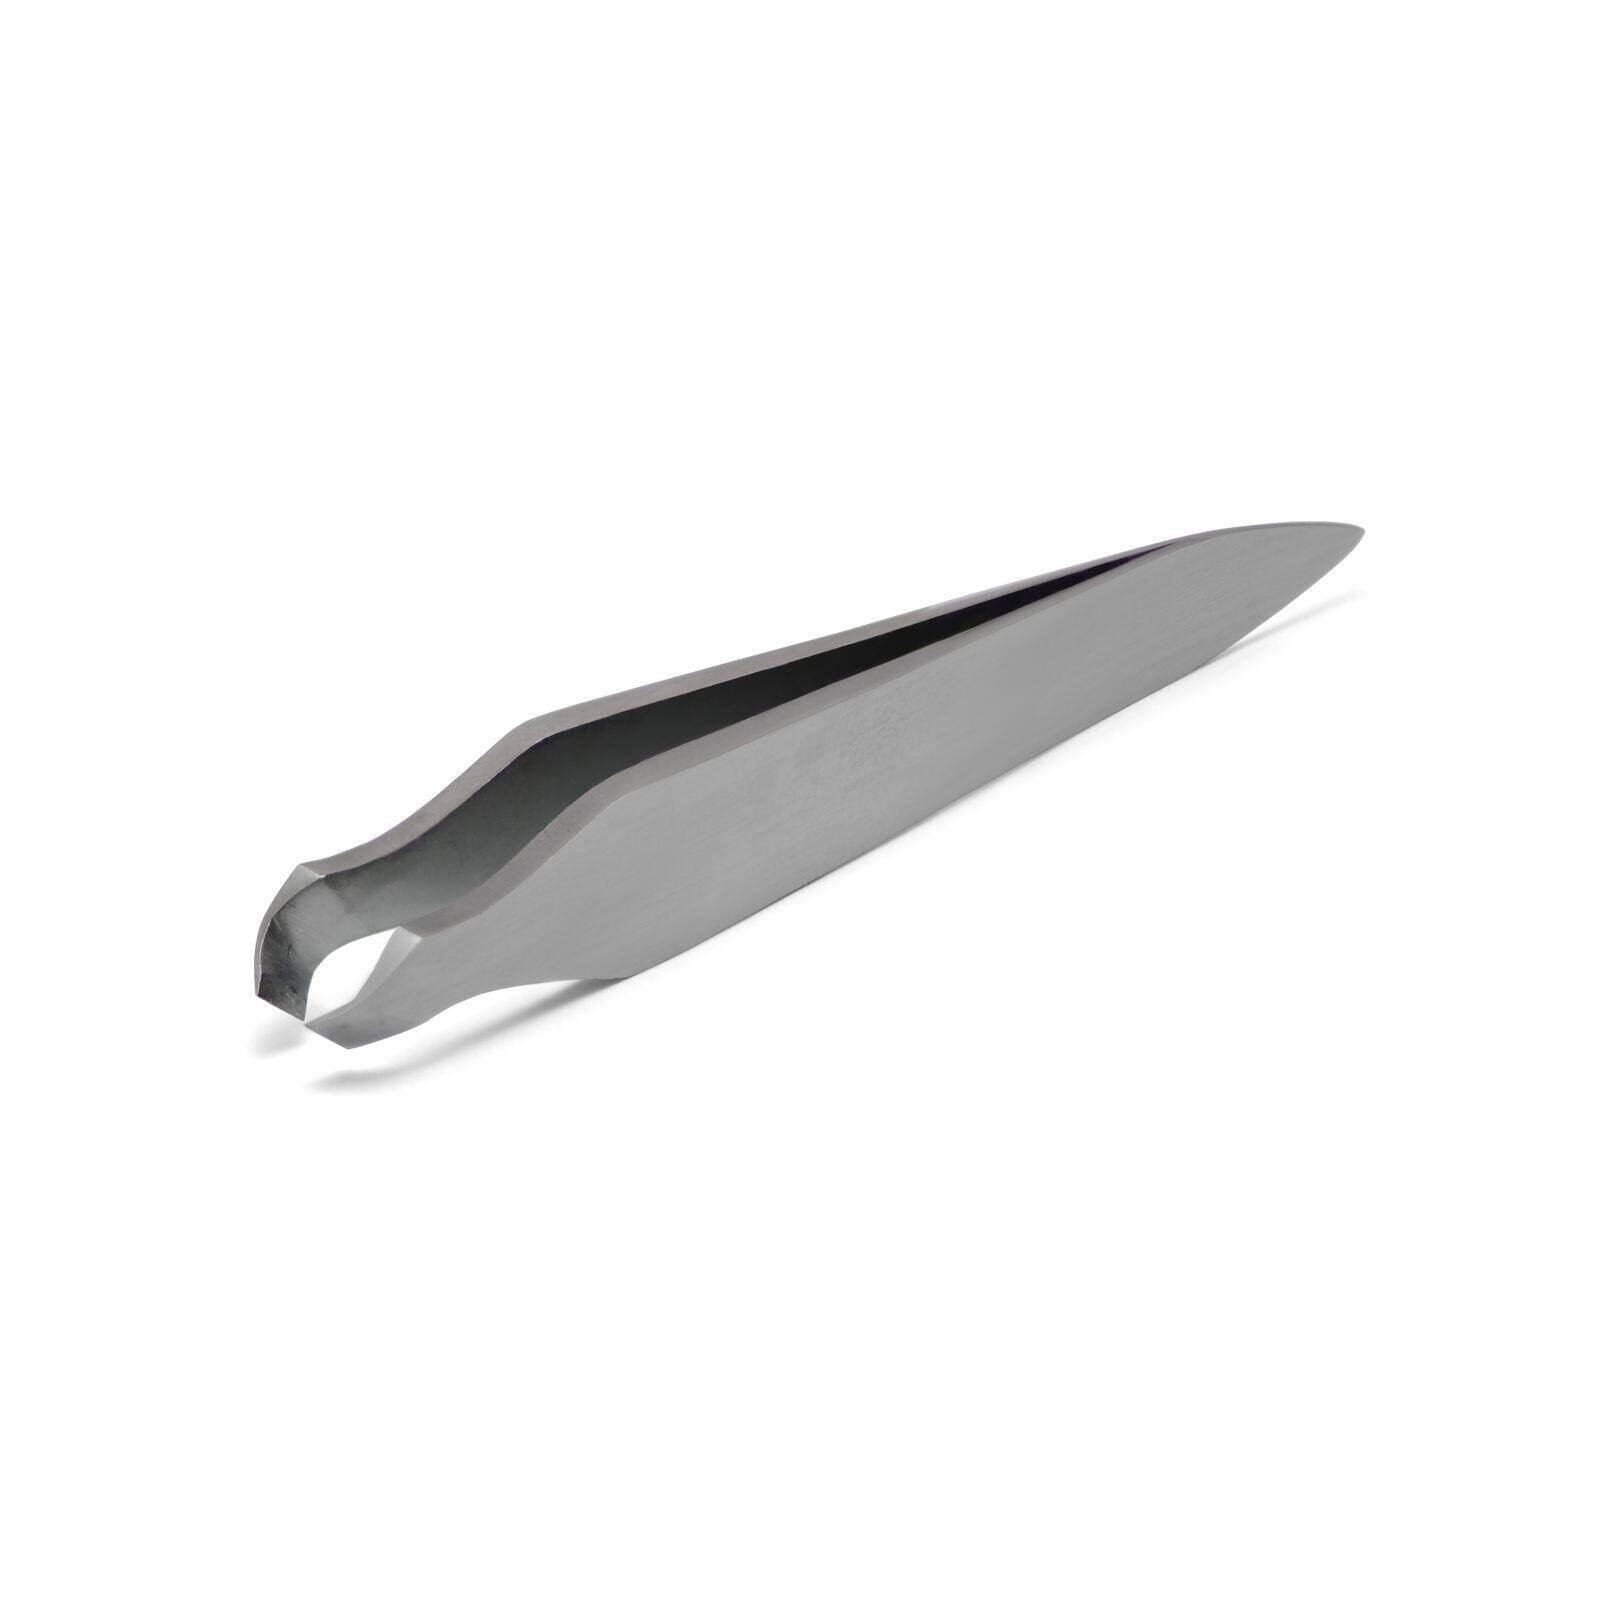 Made Nippers bleu (Germany) Store Mont 1525 Shape, Solingen in Steel, Tweezers a - in Cuticle Stainless